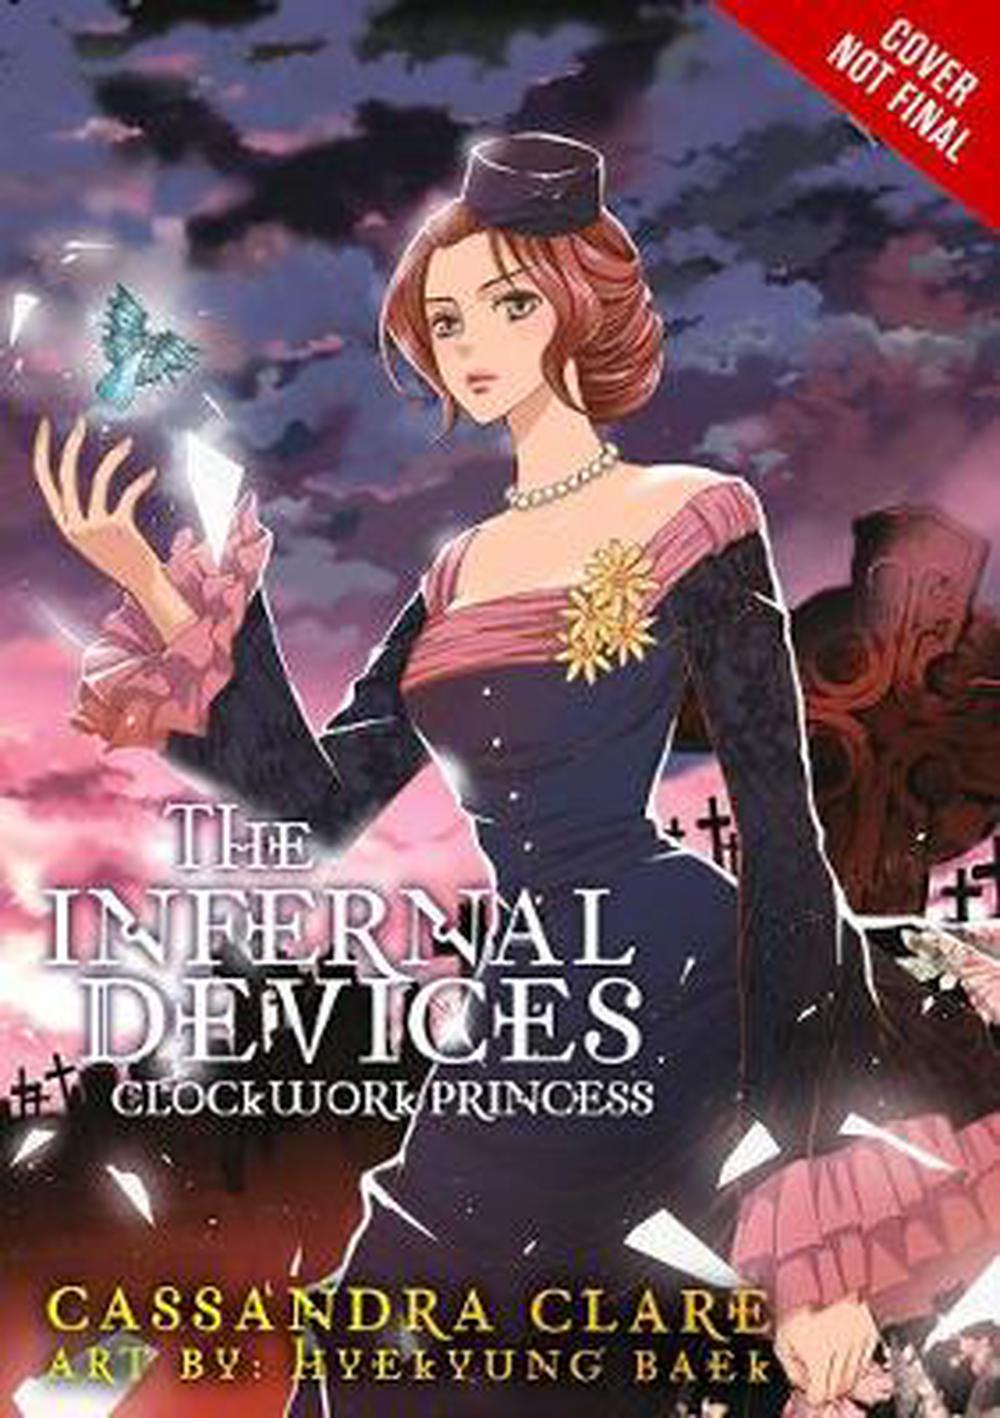 the infernal devices manga